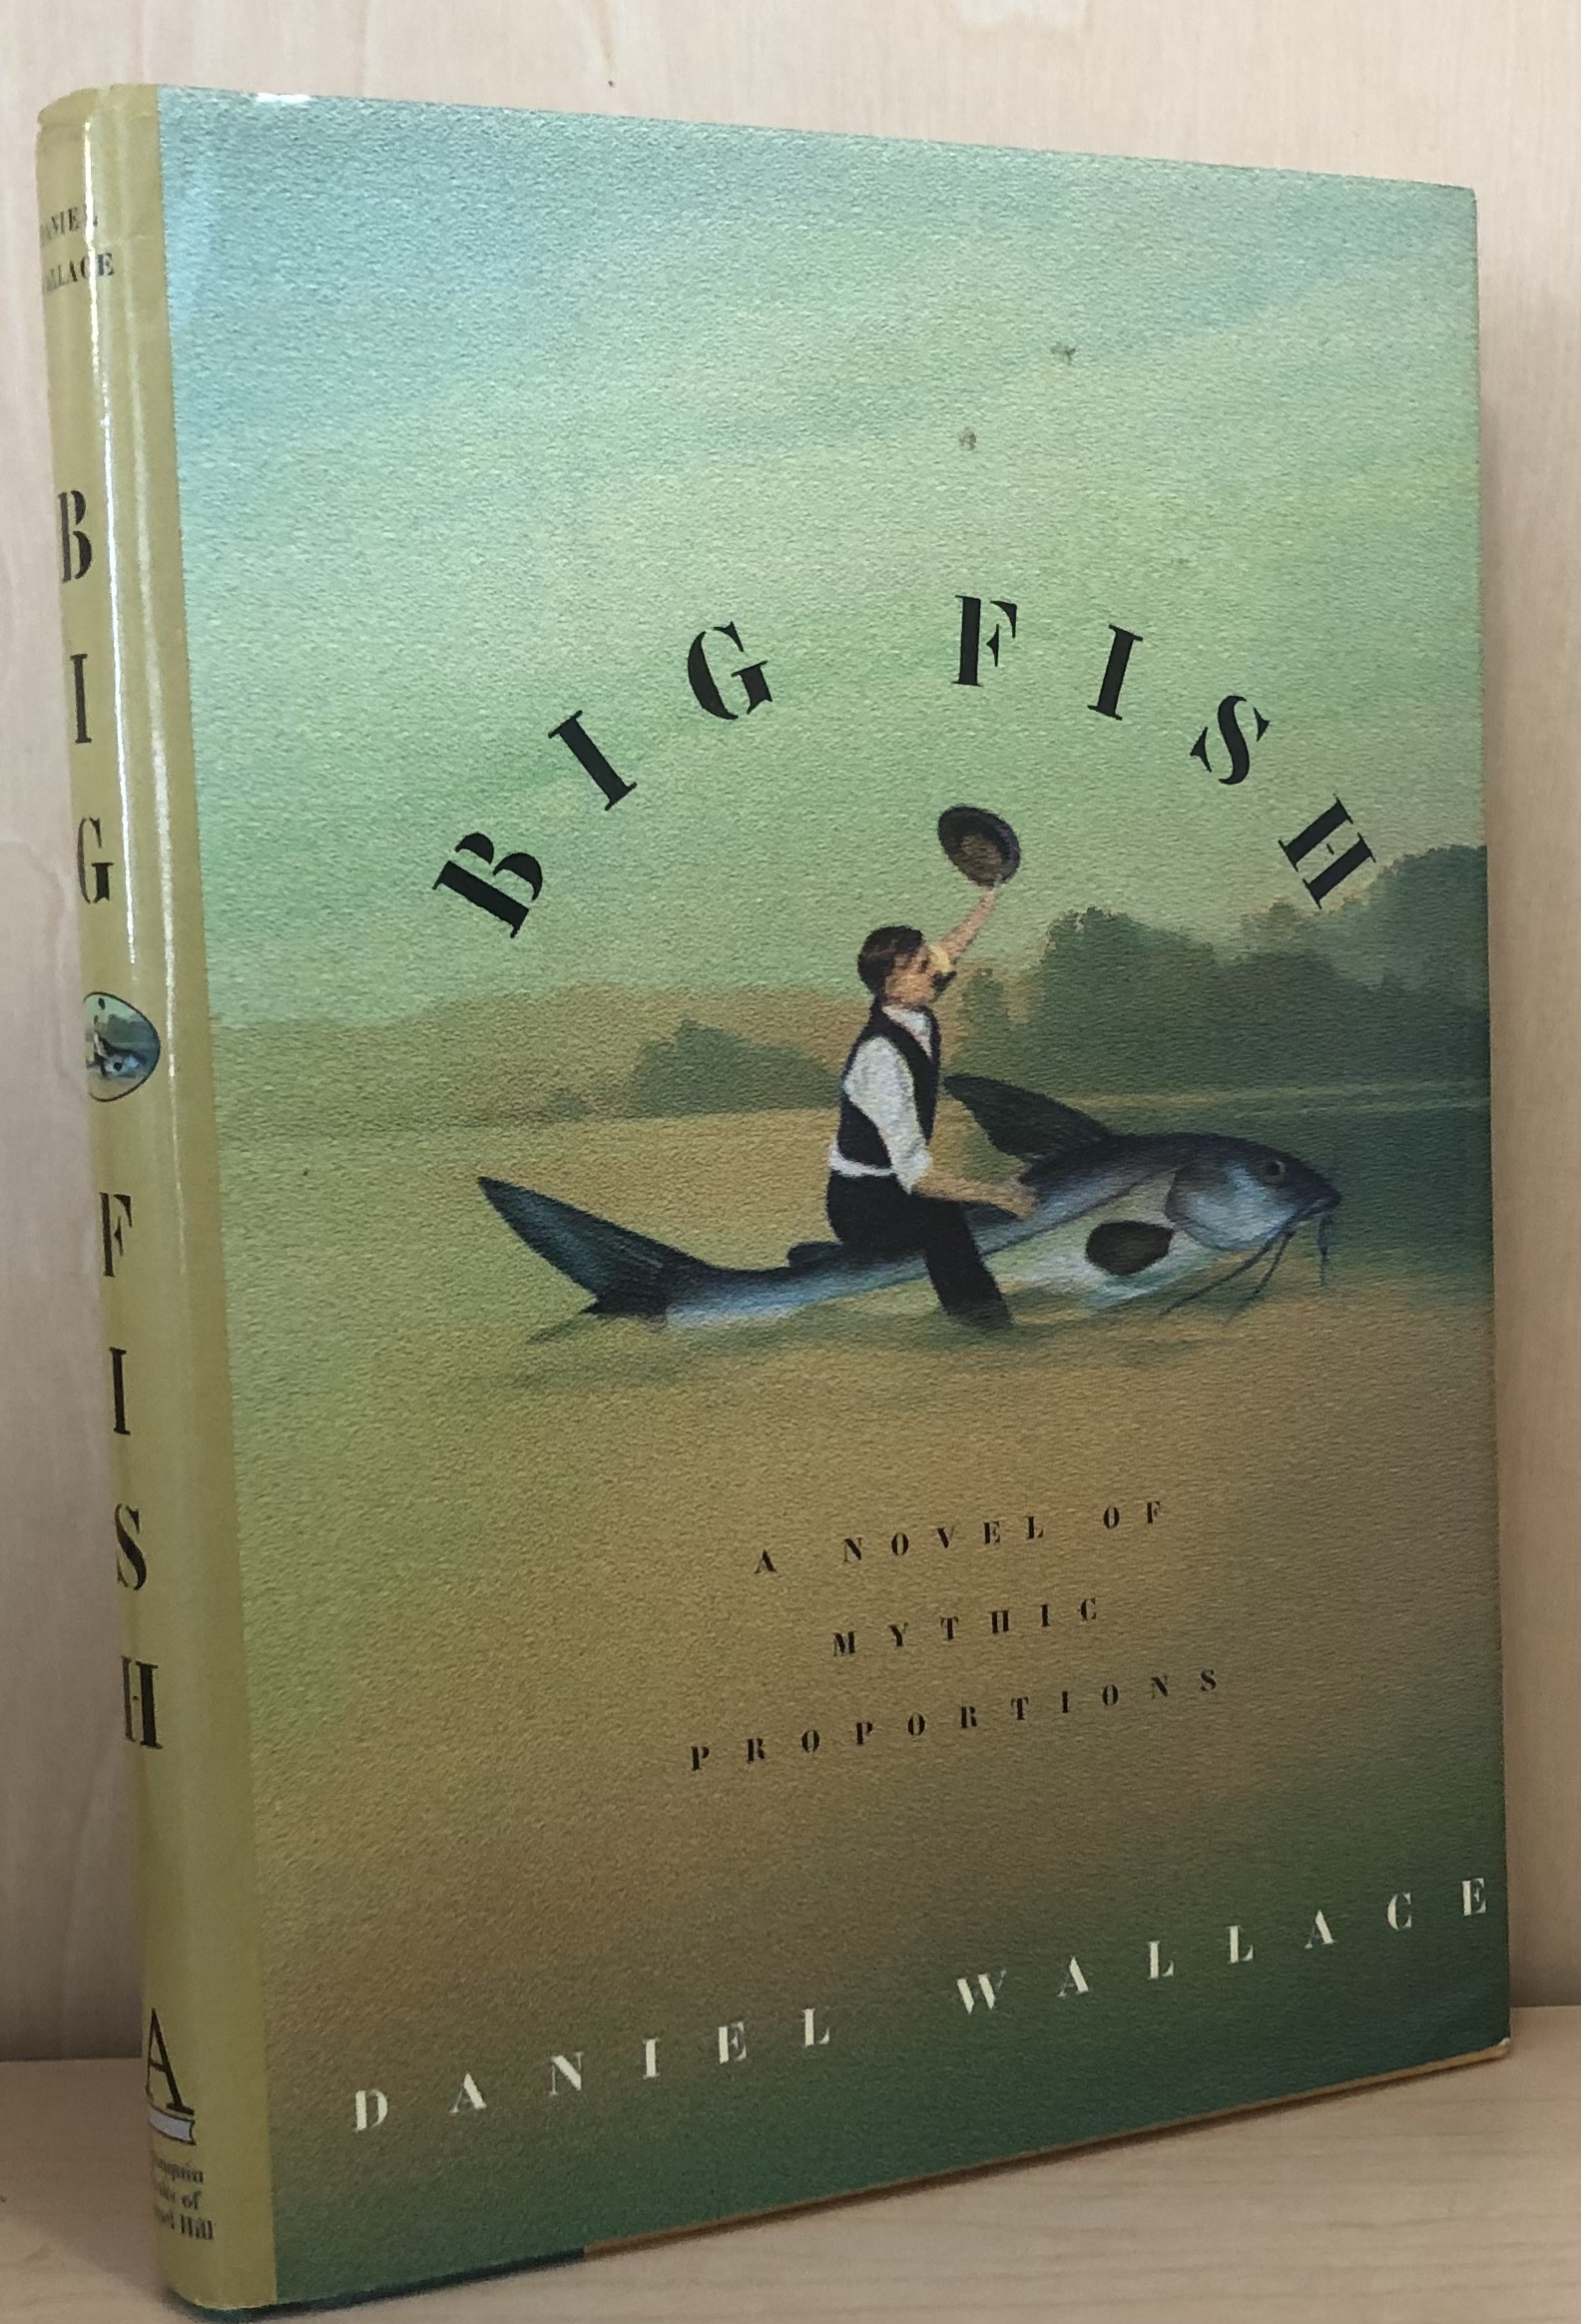 Big Fish by Wallace, Daniel: Very Good Hardcover (1998) 1st Edition, Signed  by Author(s)